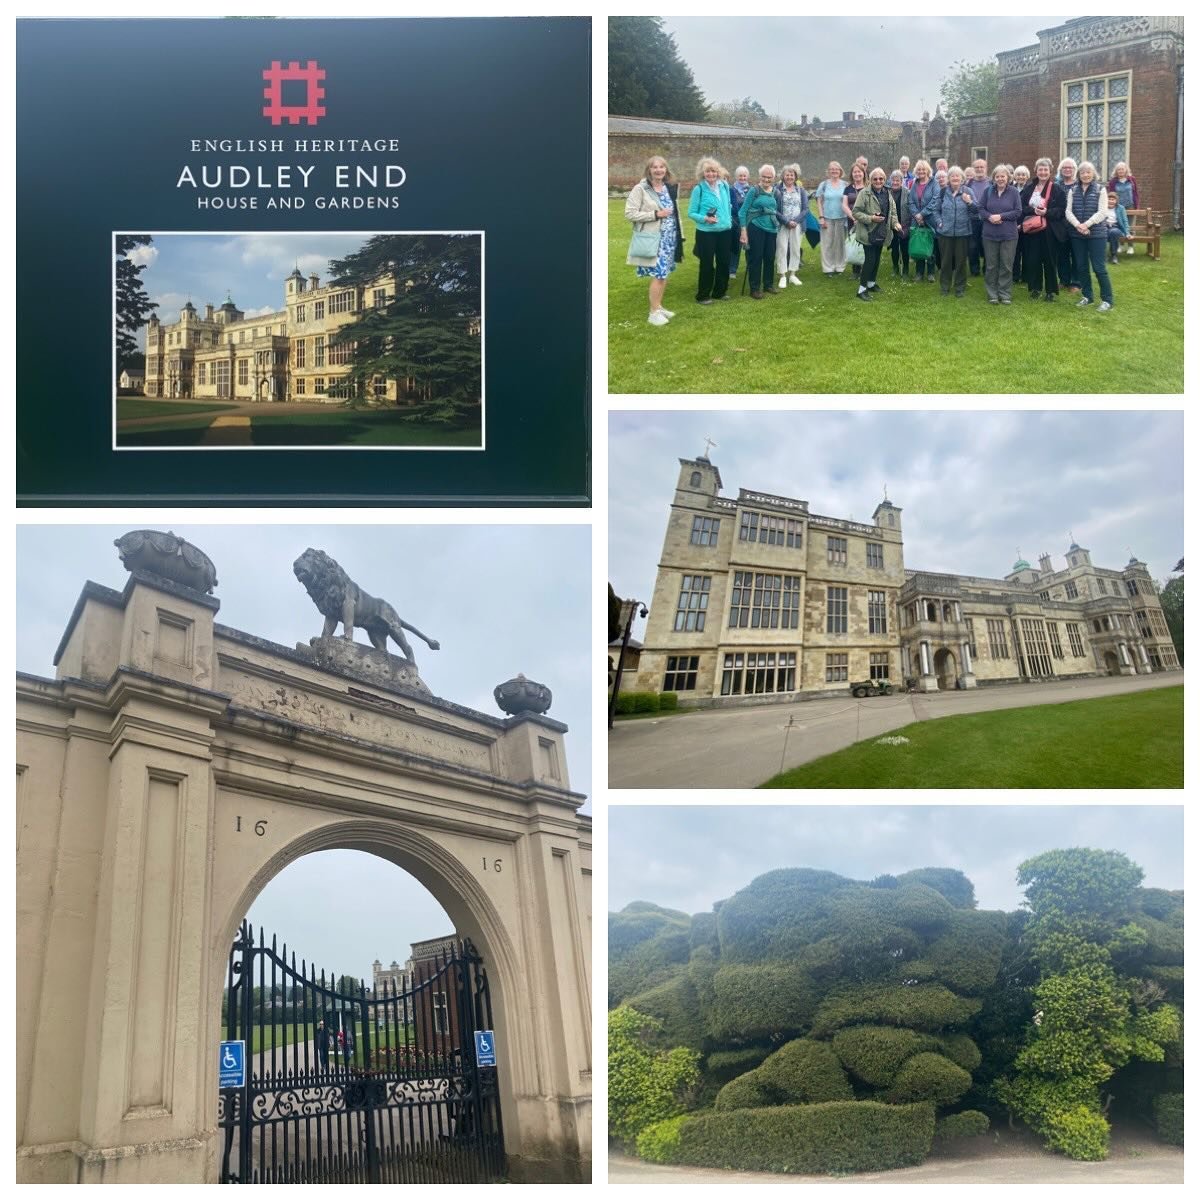 A large group of Friends left Sheffield last Wednesday for an overnight visit which took in @englishheritage Audley End near Cambridge, and the Beth Chatto Gardens and @rhs Hyde Hall in Essex.
With good weather, good food, good company and plenty of 